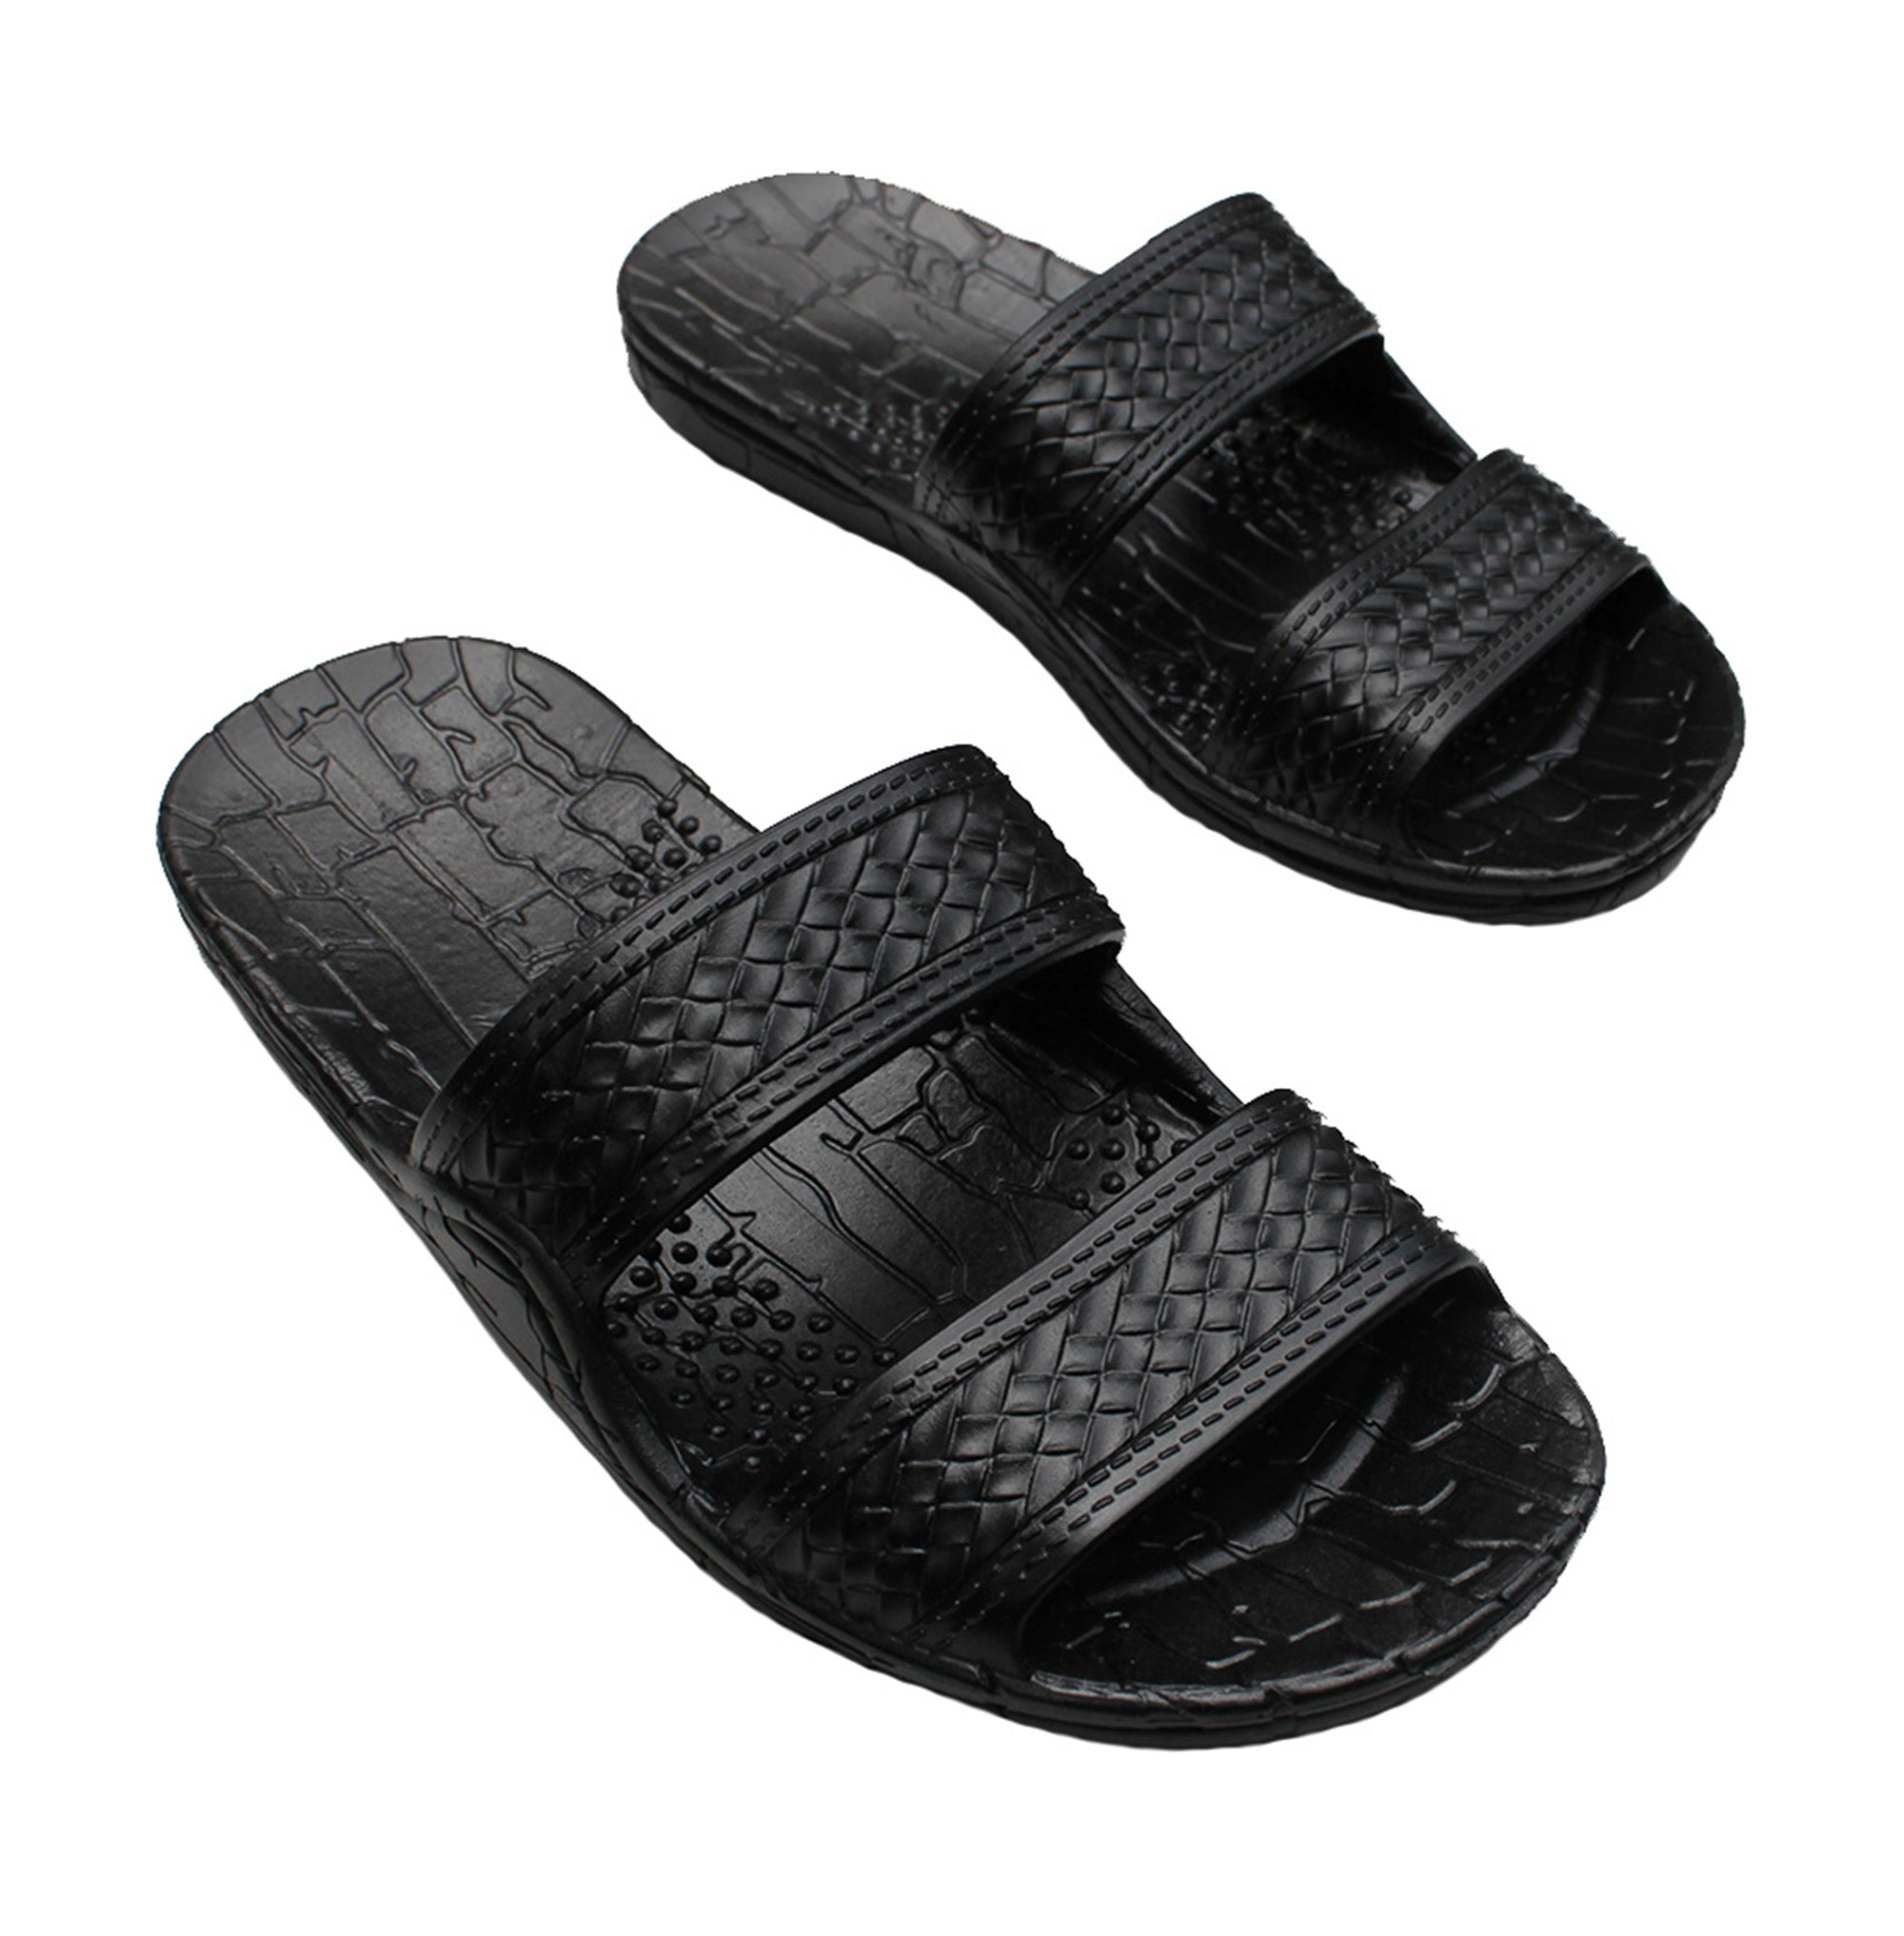 Brown and Black Jesus Style Hawaii Sandals For Women and Teen